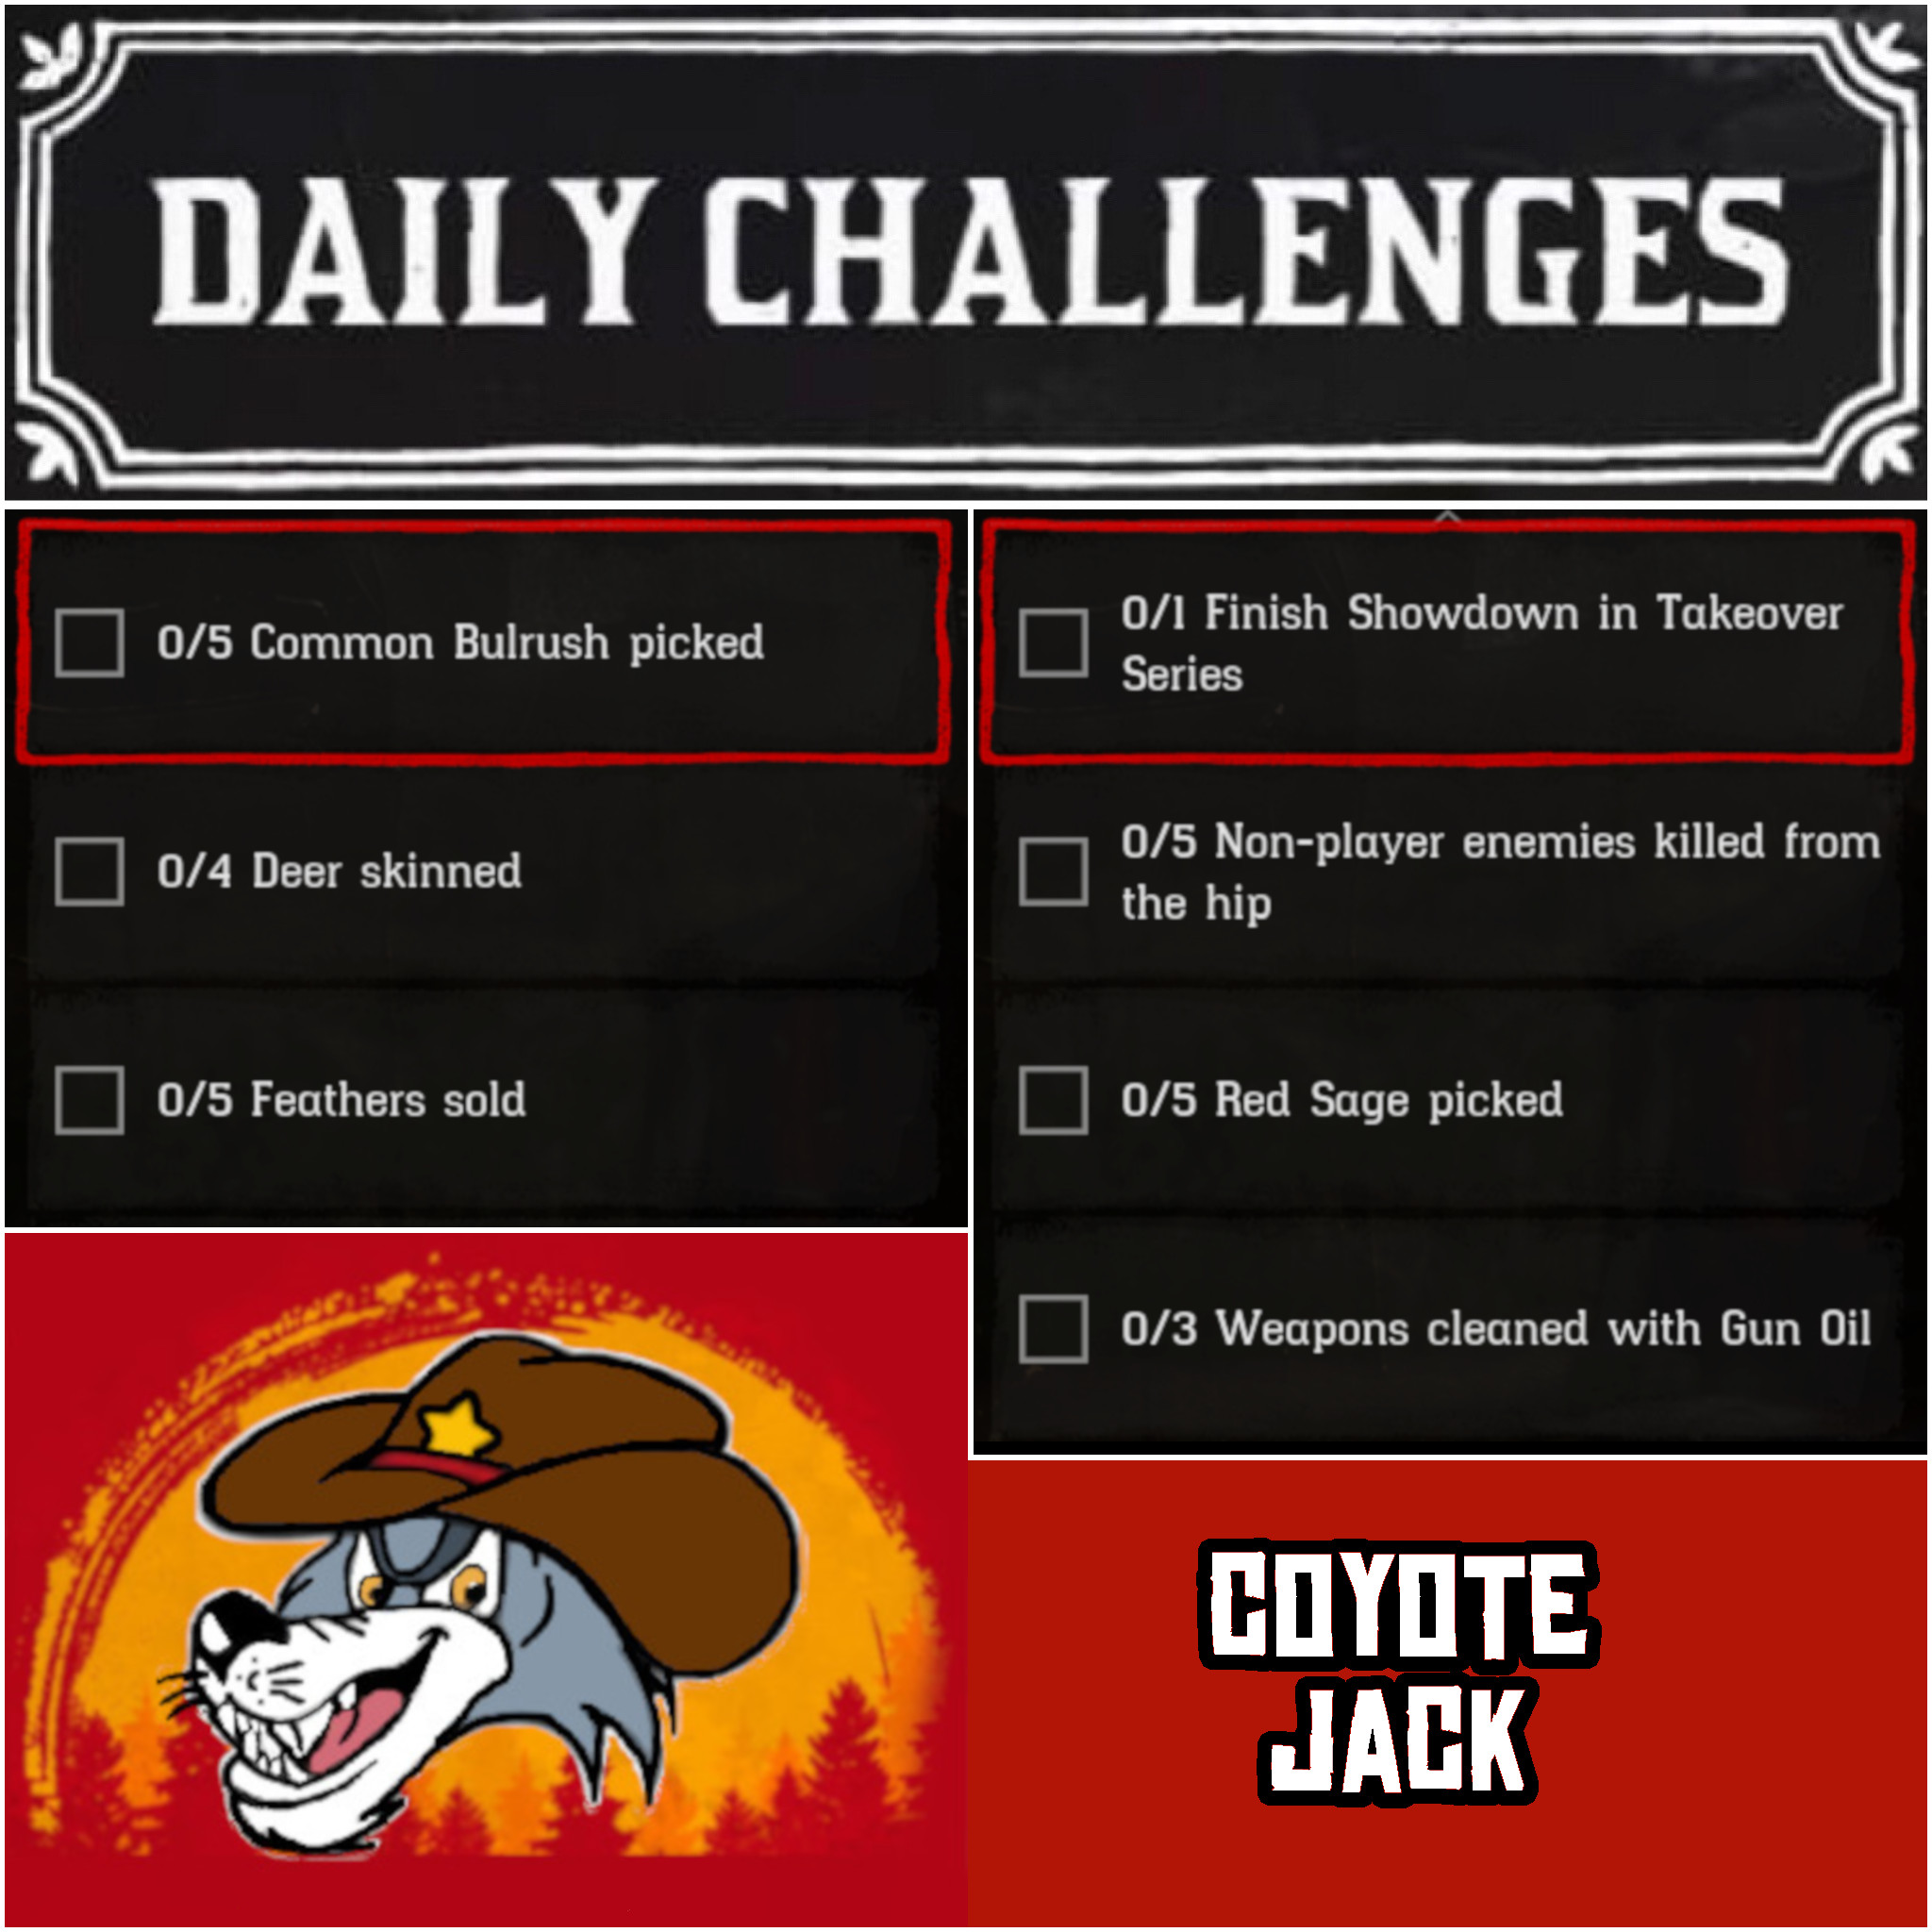 You are currently viewing Thursday 11 March Daily Challenges